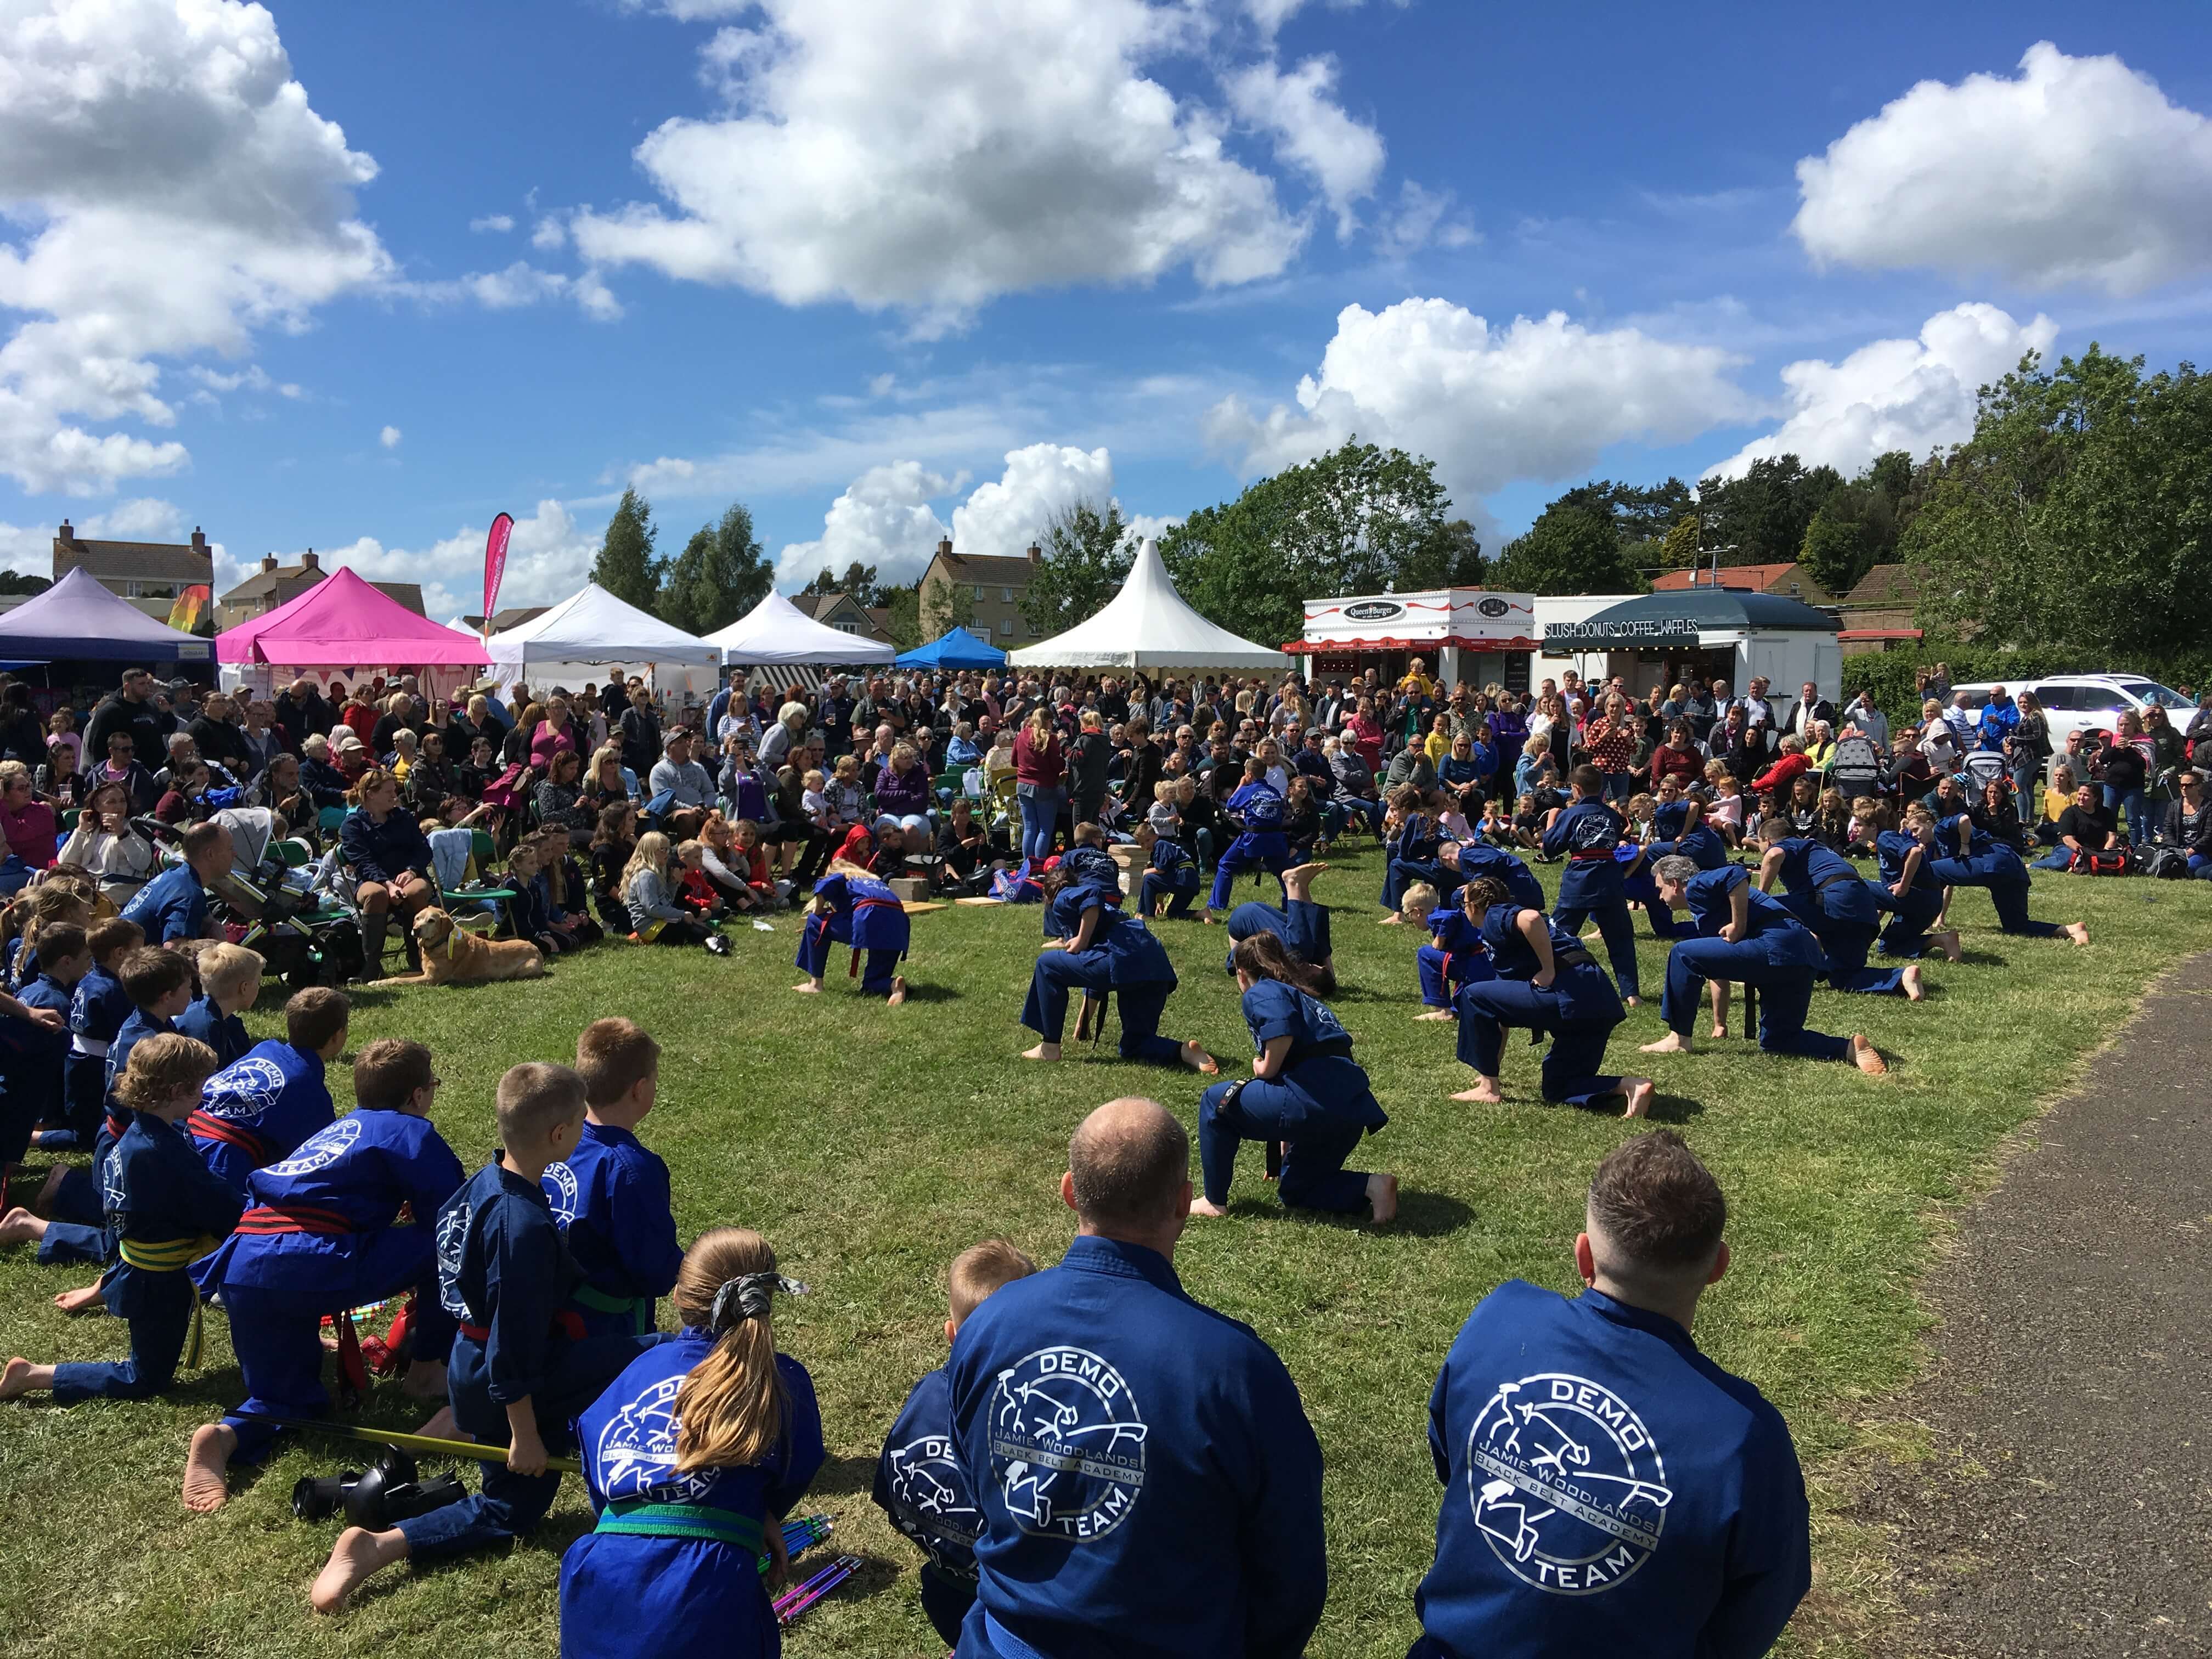 Over 2,000 people turn out for Peasedown's 11th Annual Party in the Park Festival